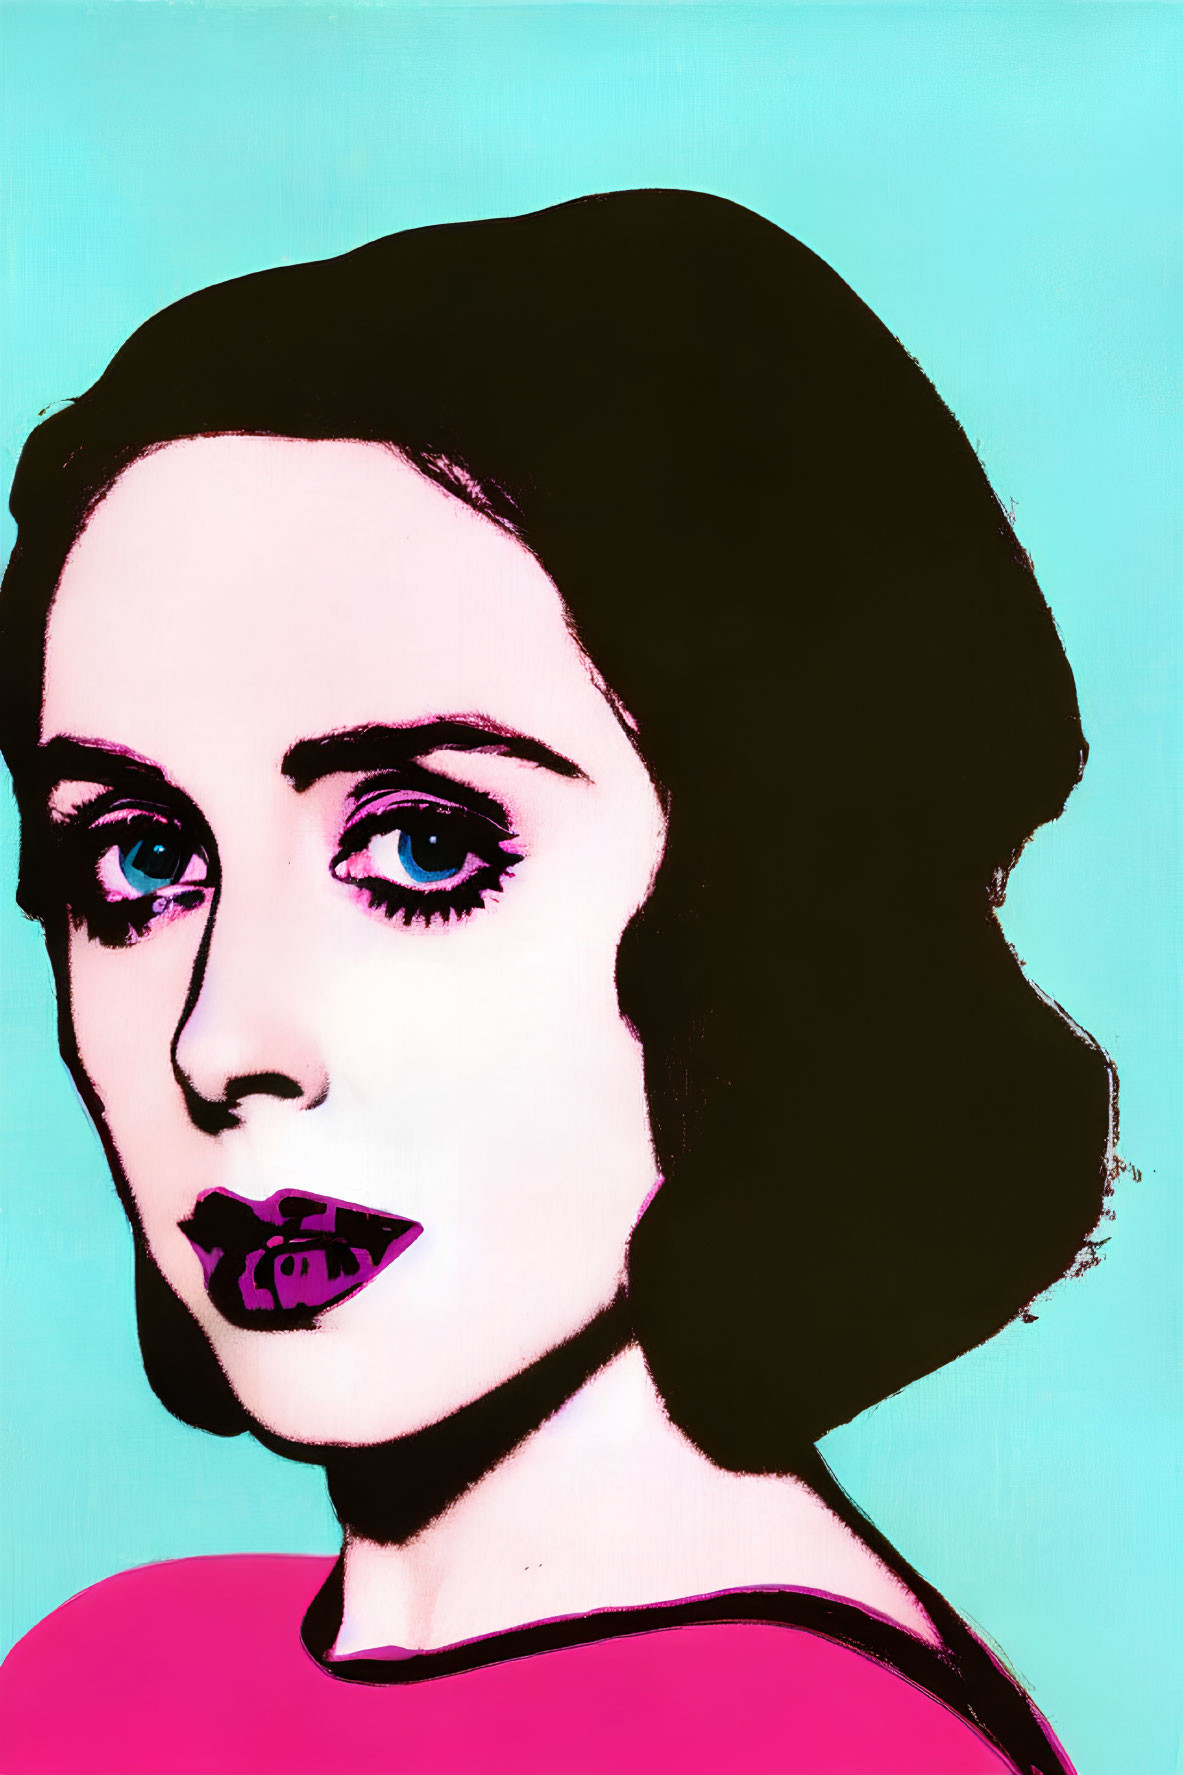 Vibrant pop art portrait of a woman with striking eyes and lips